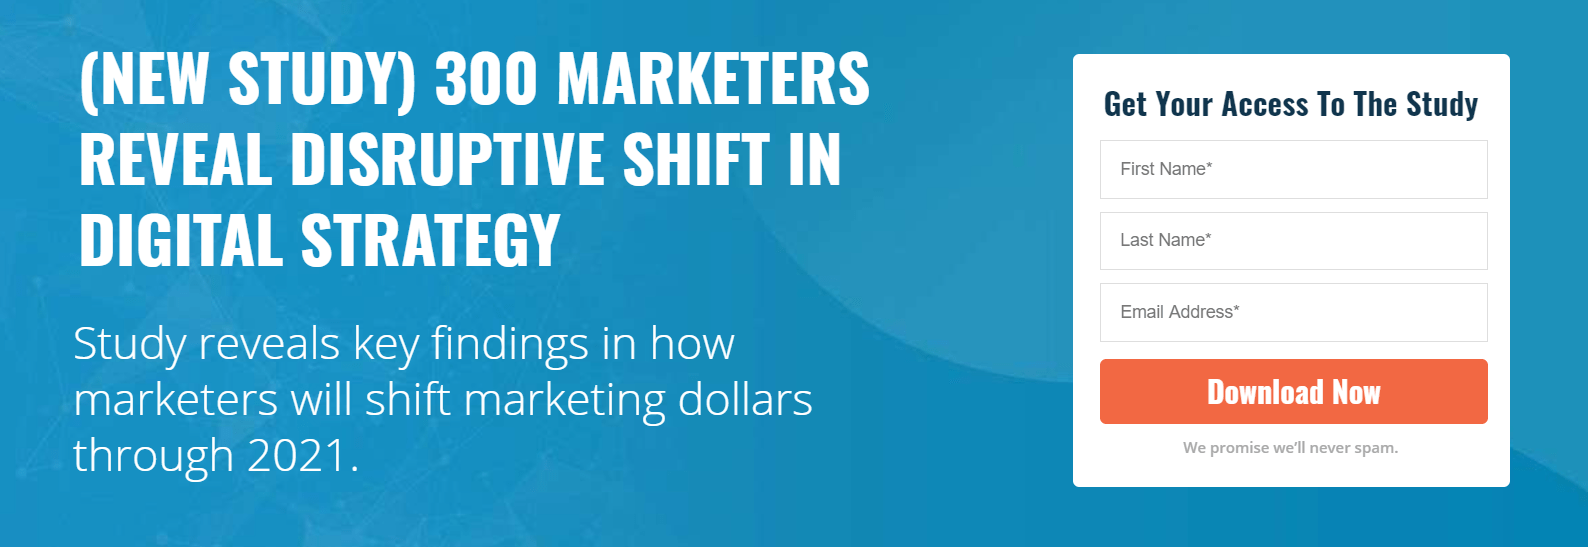 300 marketers reveal disruptive shift in digital strategy